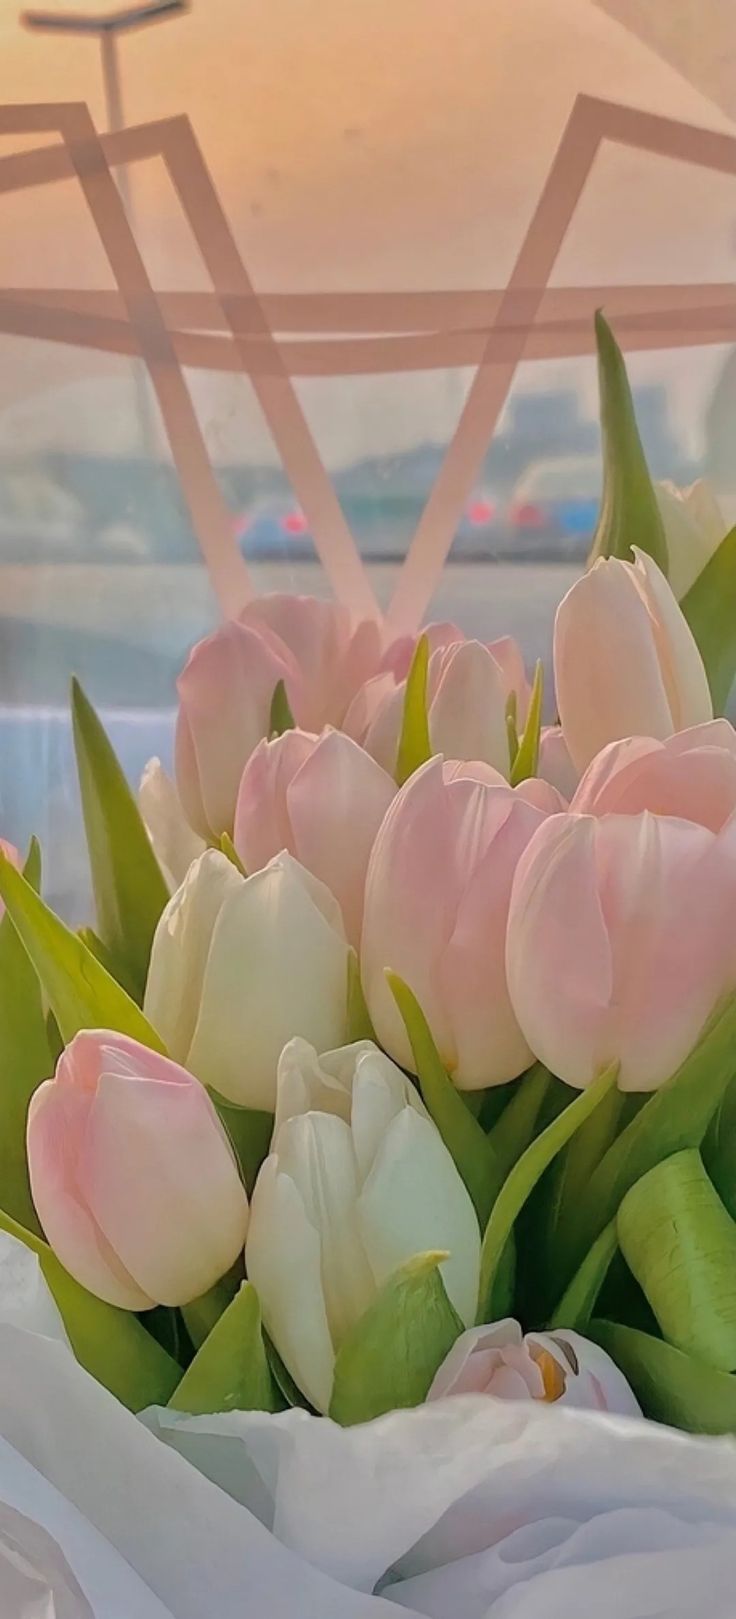 A bouquet of pink and white tulips wrapped in white paper. - Tulip